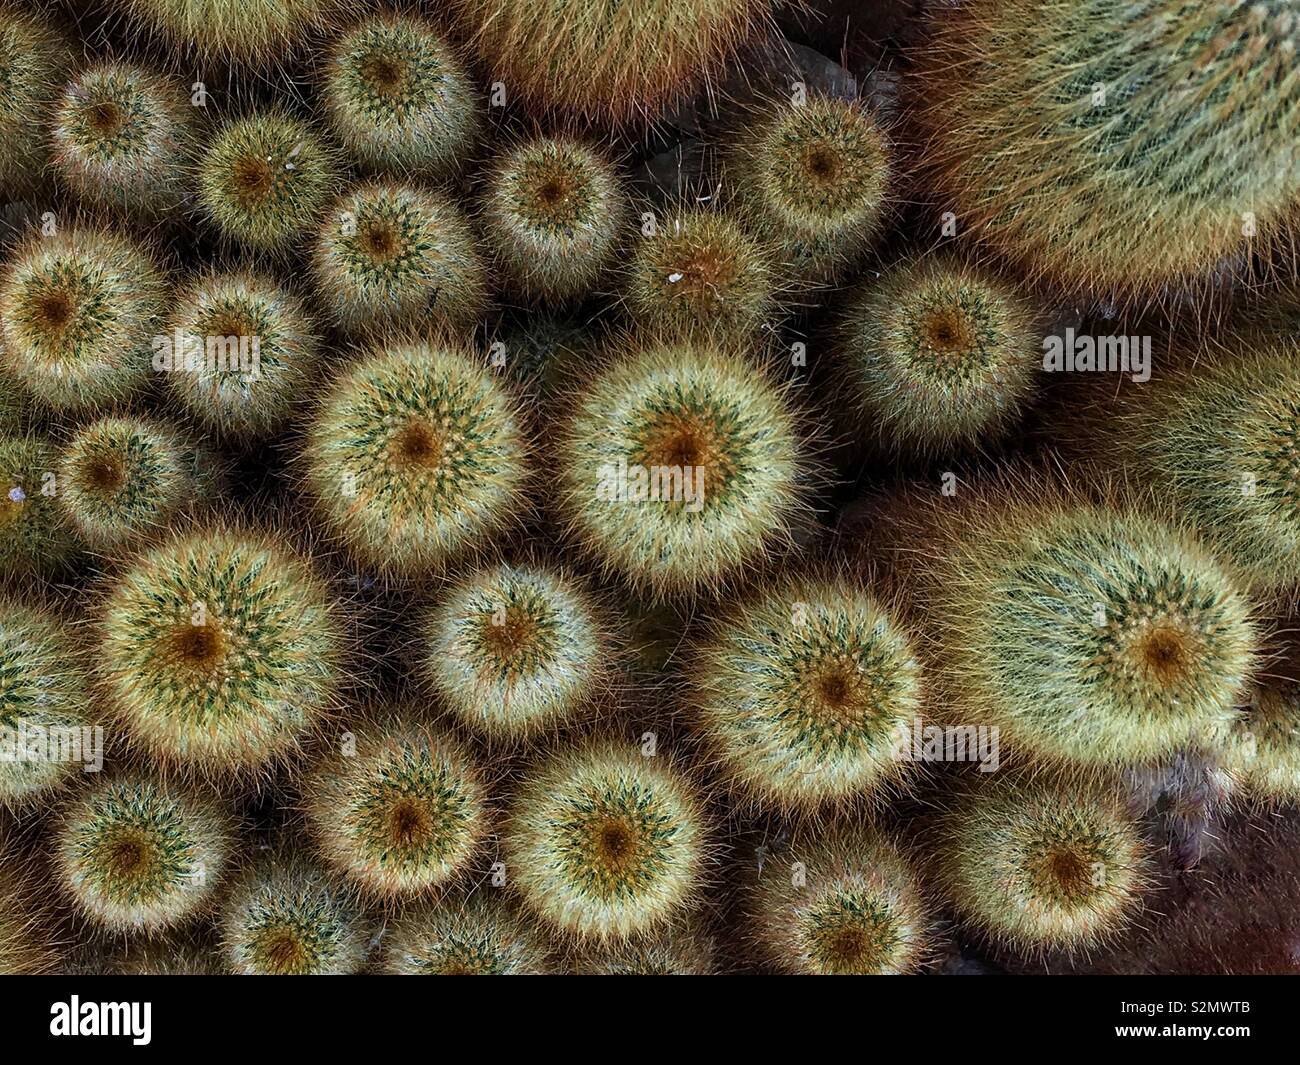 Top view of a colony of perfect cactuses. Stock Photo